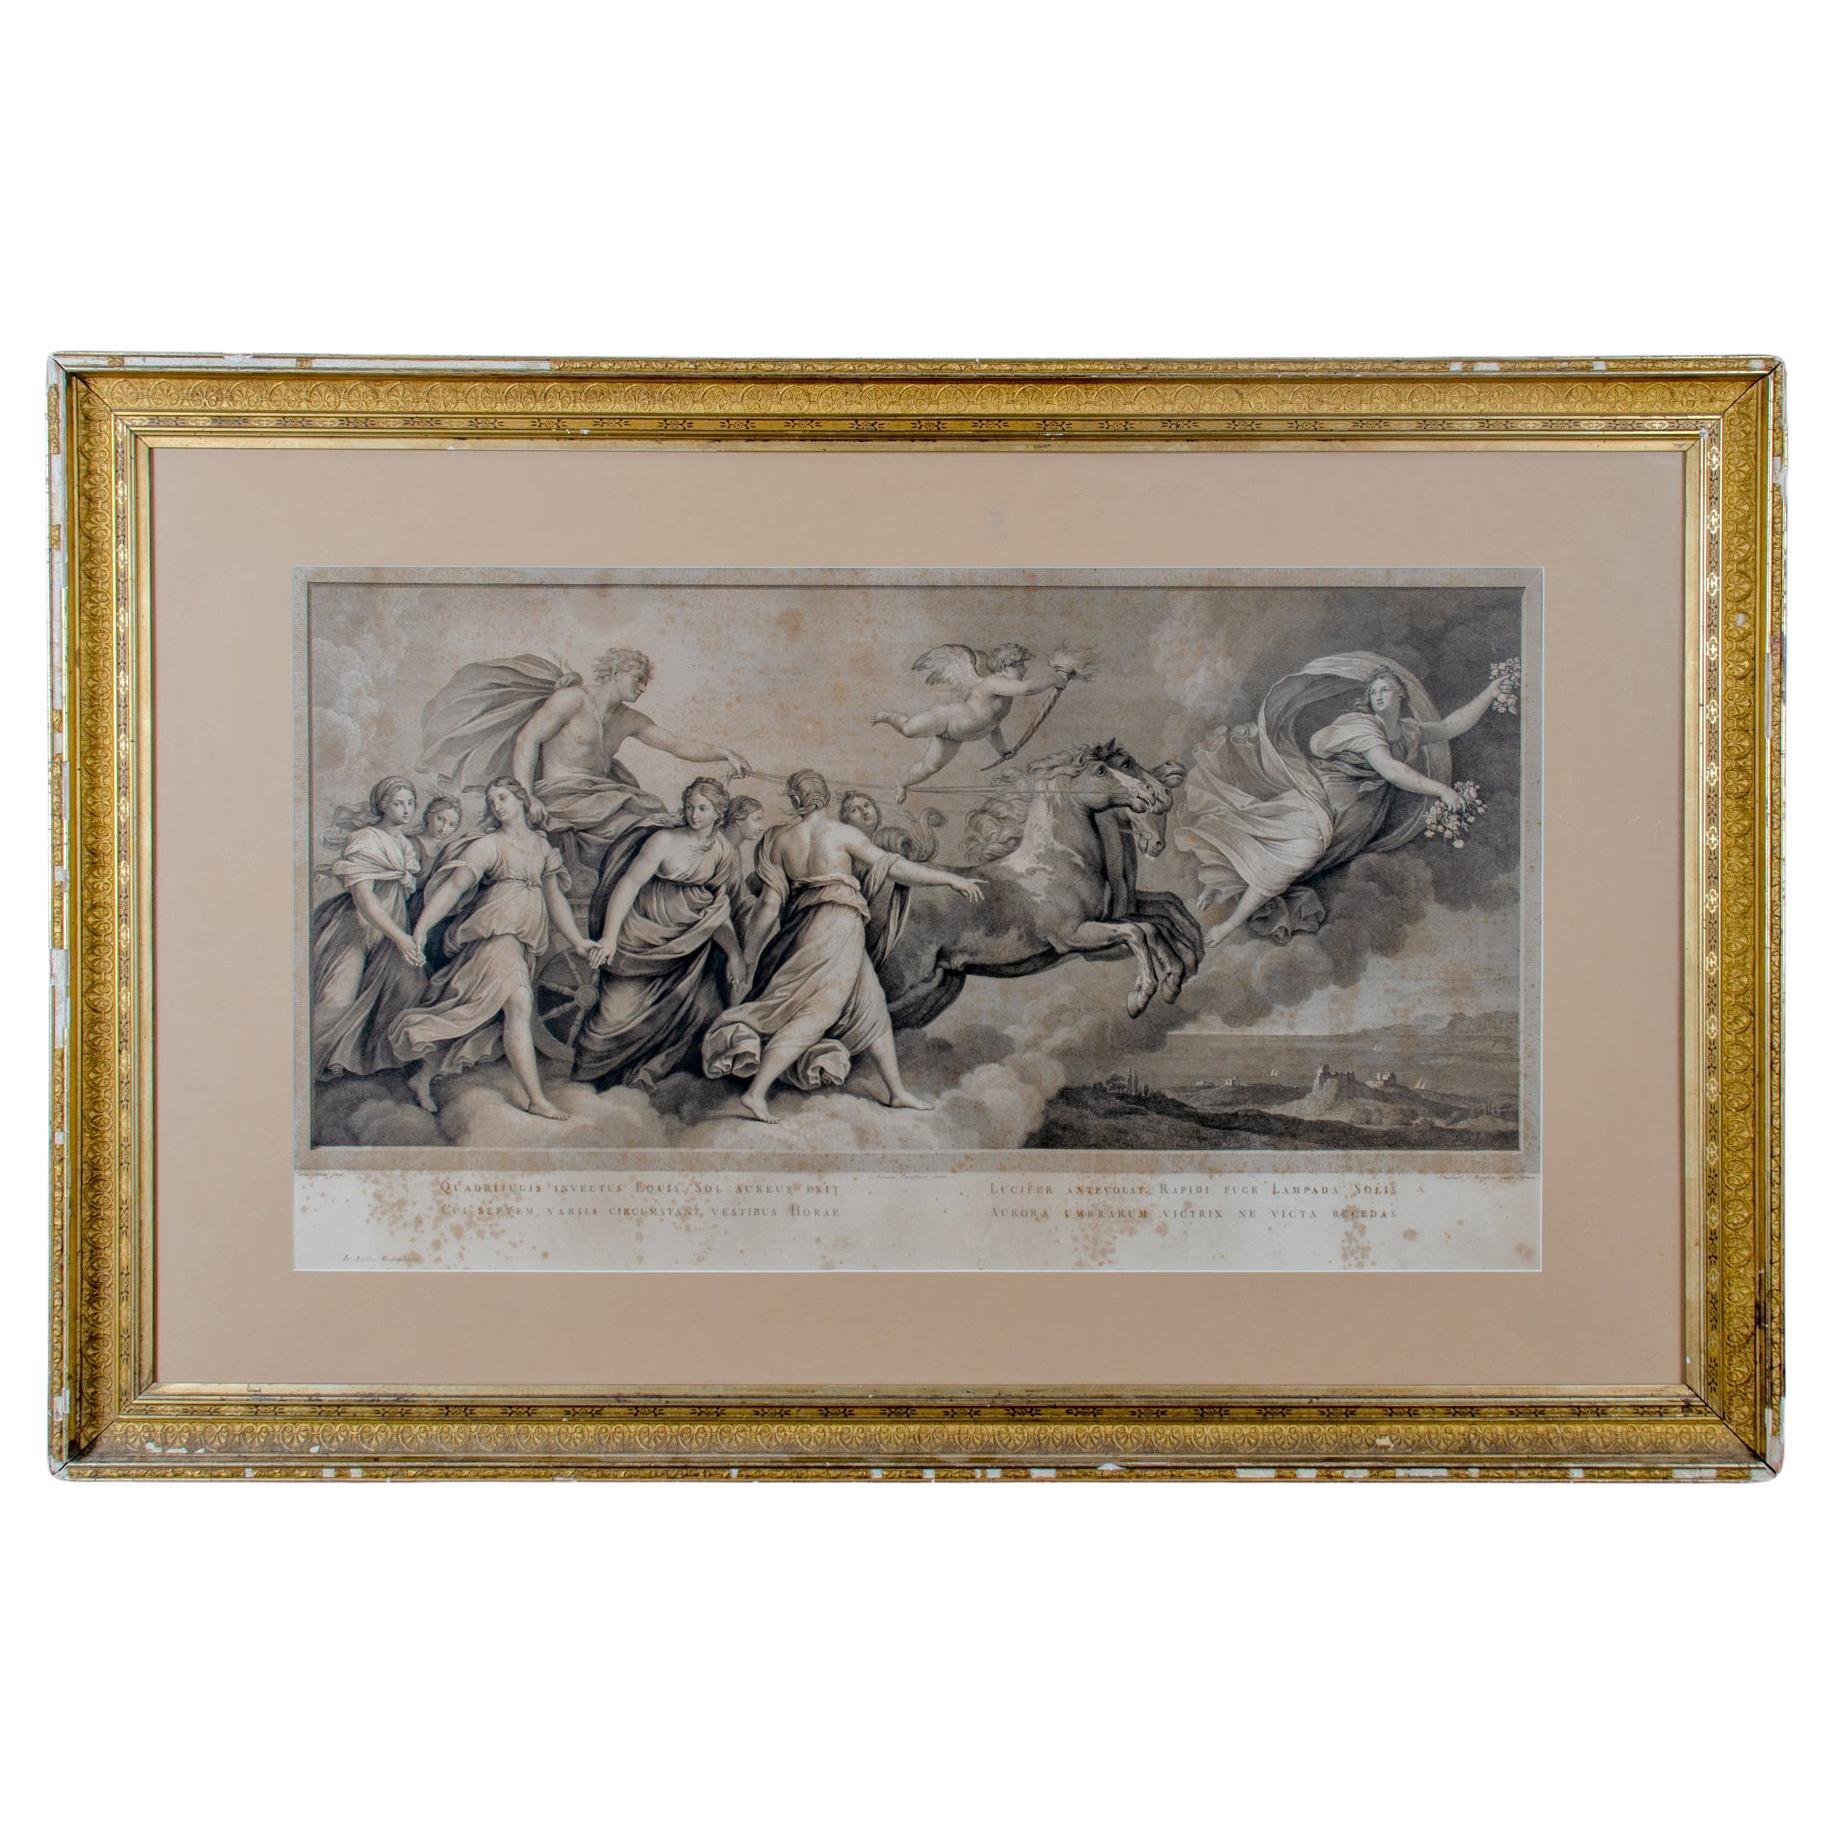 Aurora Engraving after Guido Reni Fresco by R.S. Morghen, c.1787 For Sale